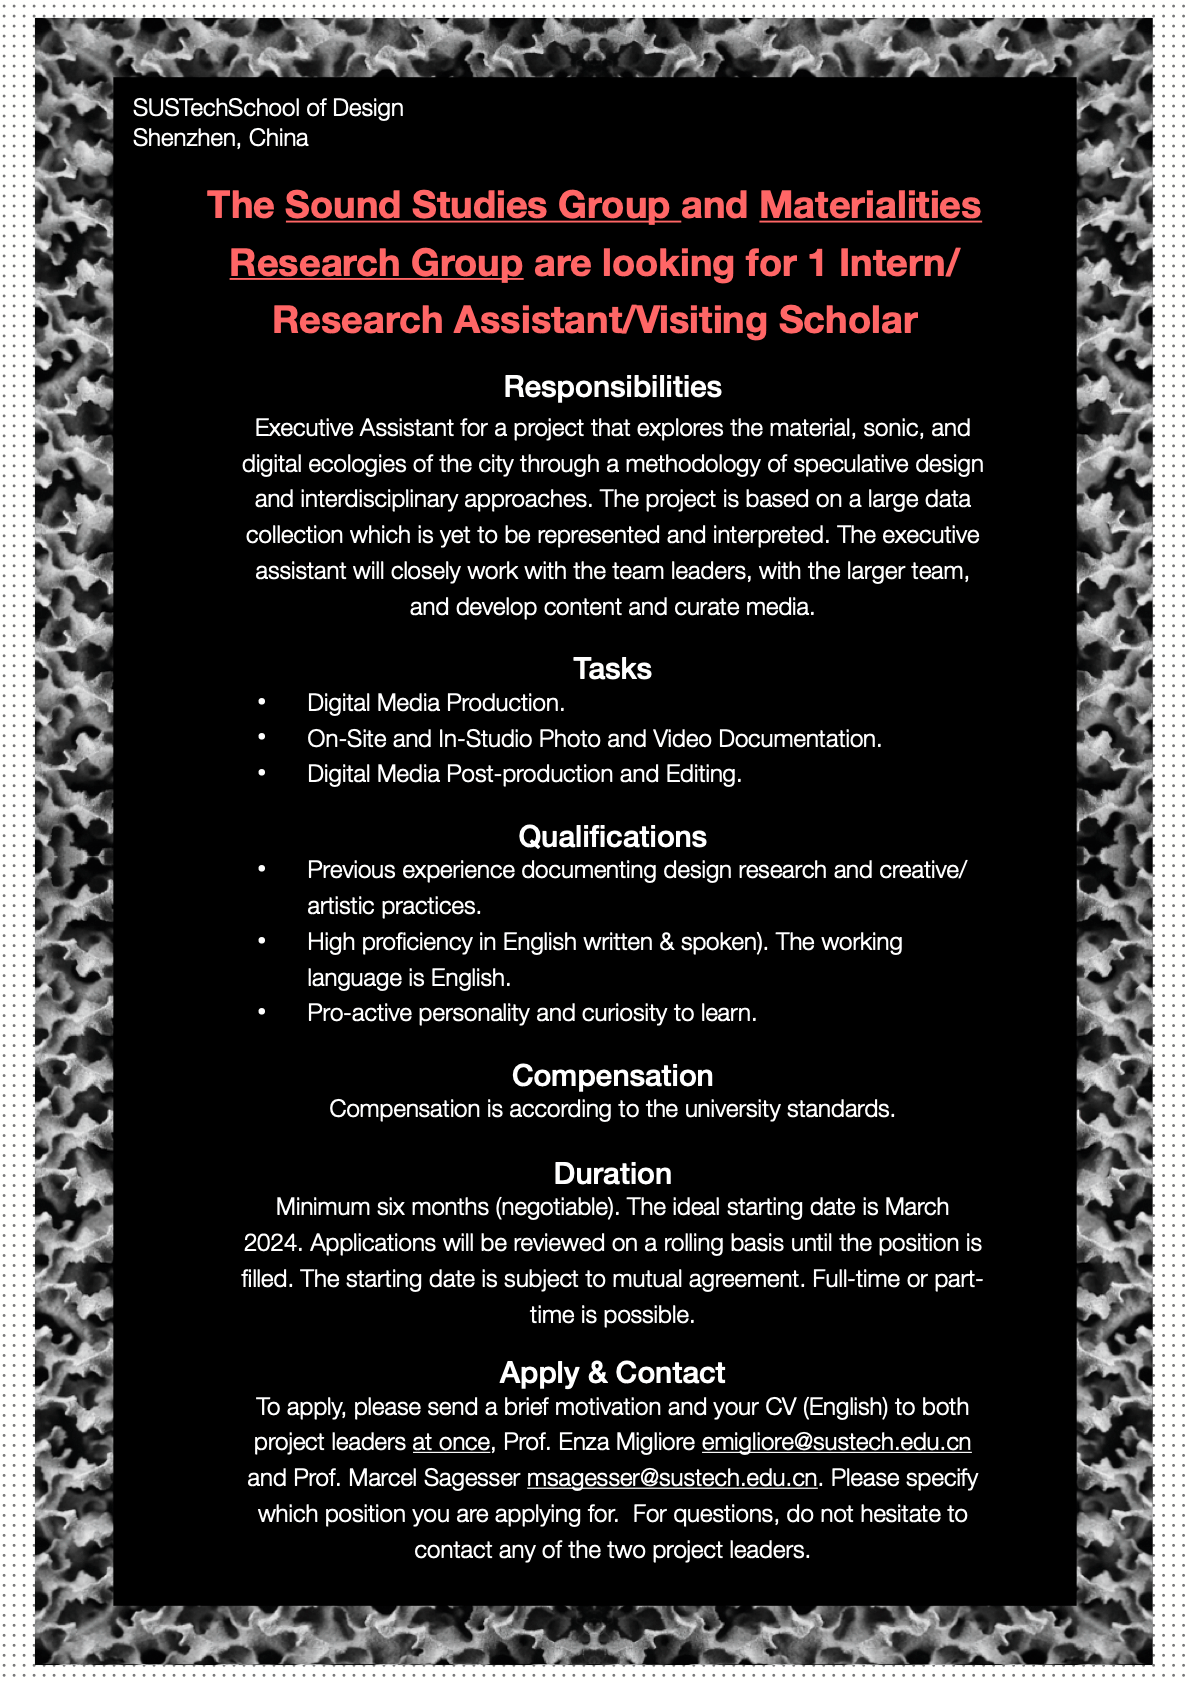 Application_ResearchAssistant_DLMarch2024.png